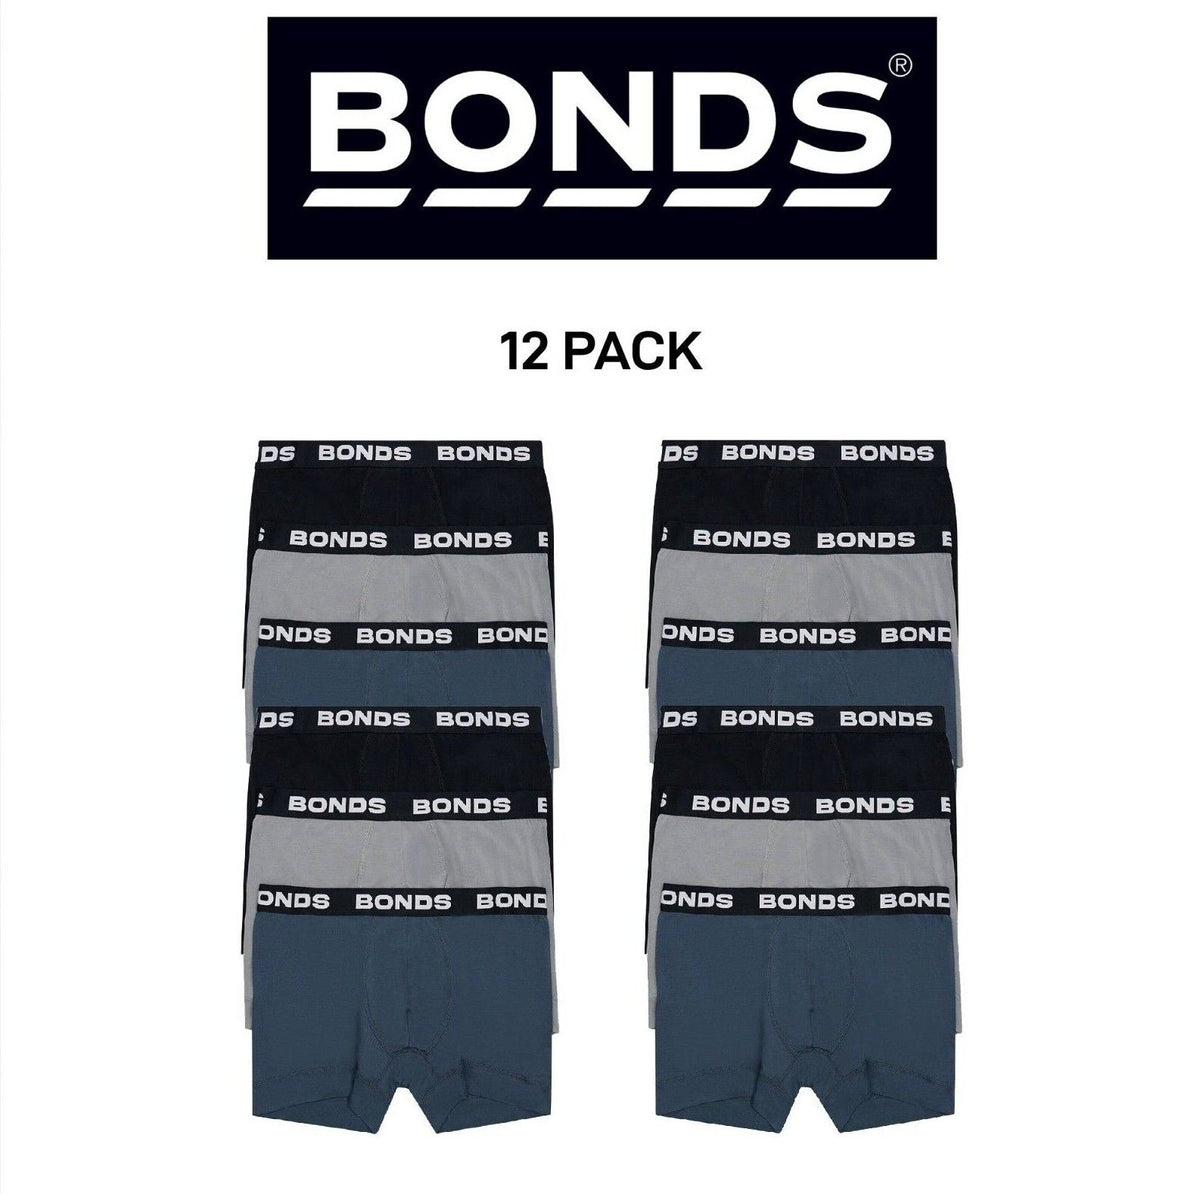 Bonds Mens Total Package Trunk Soft and Breathable Viscose Bamboo 12 Pack MWK83A